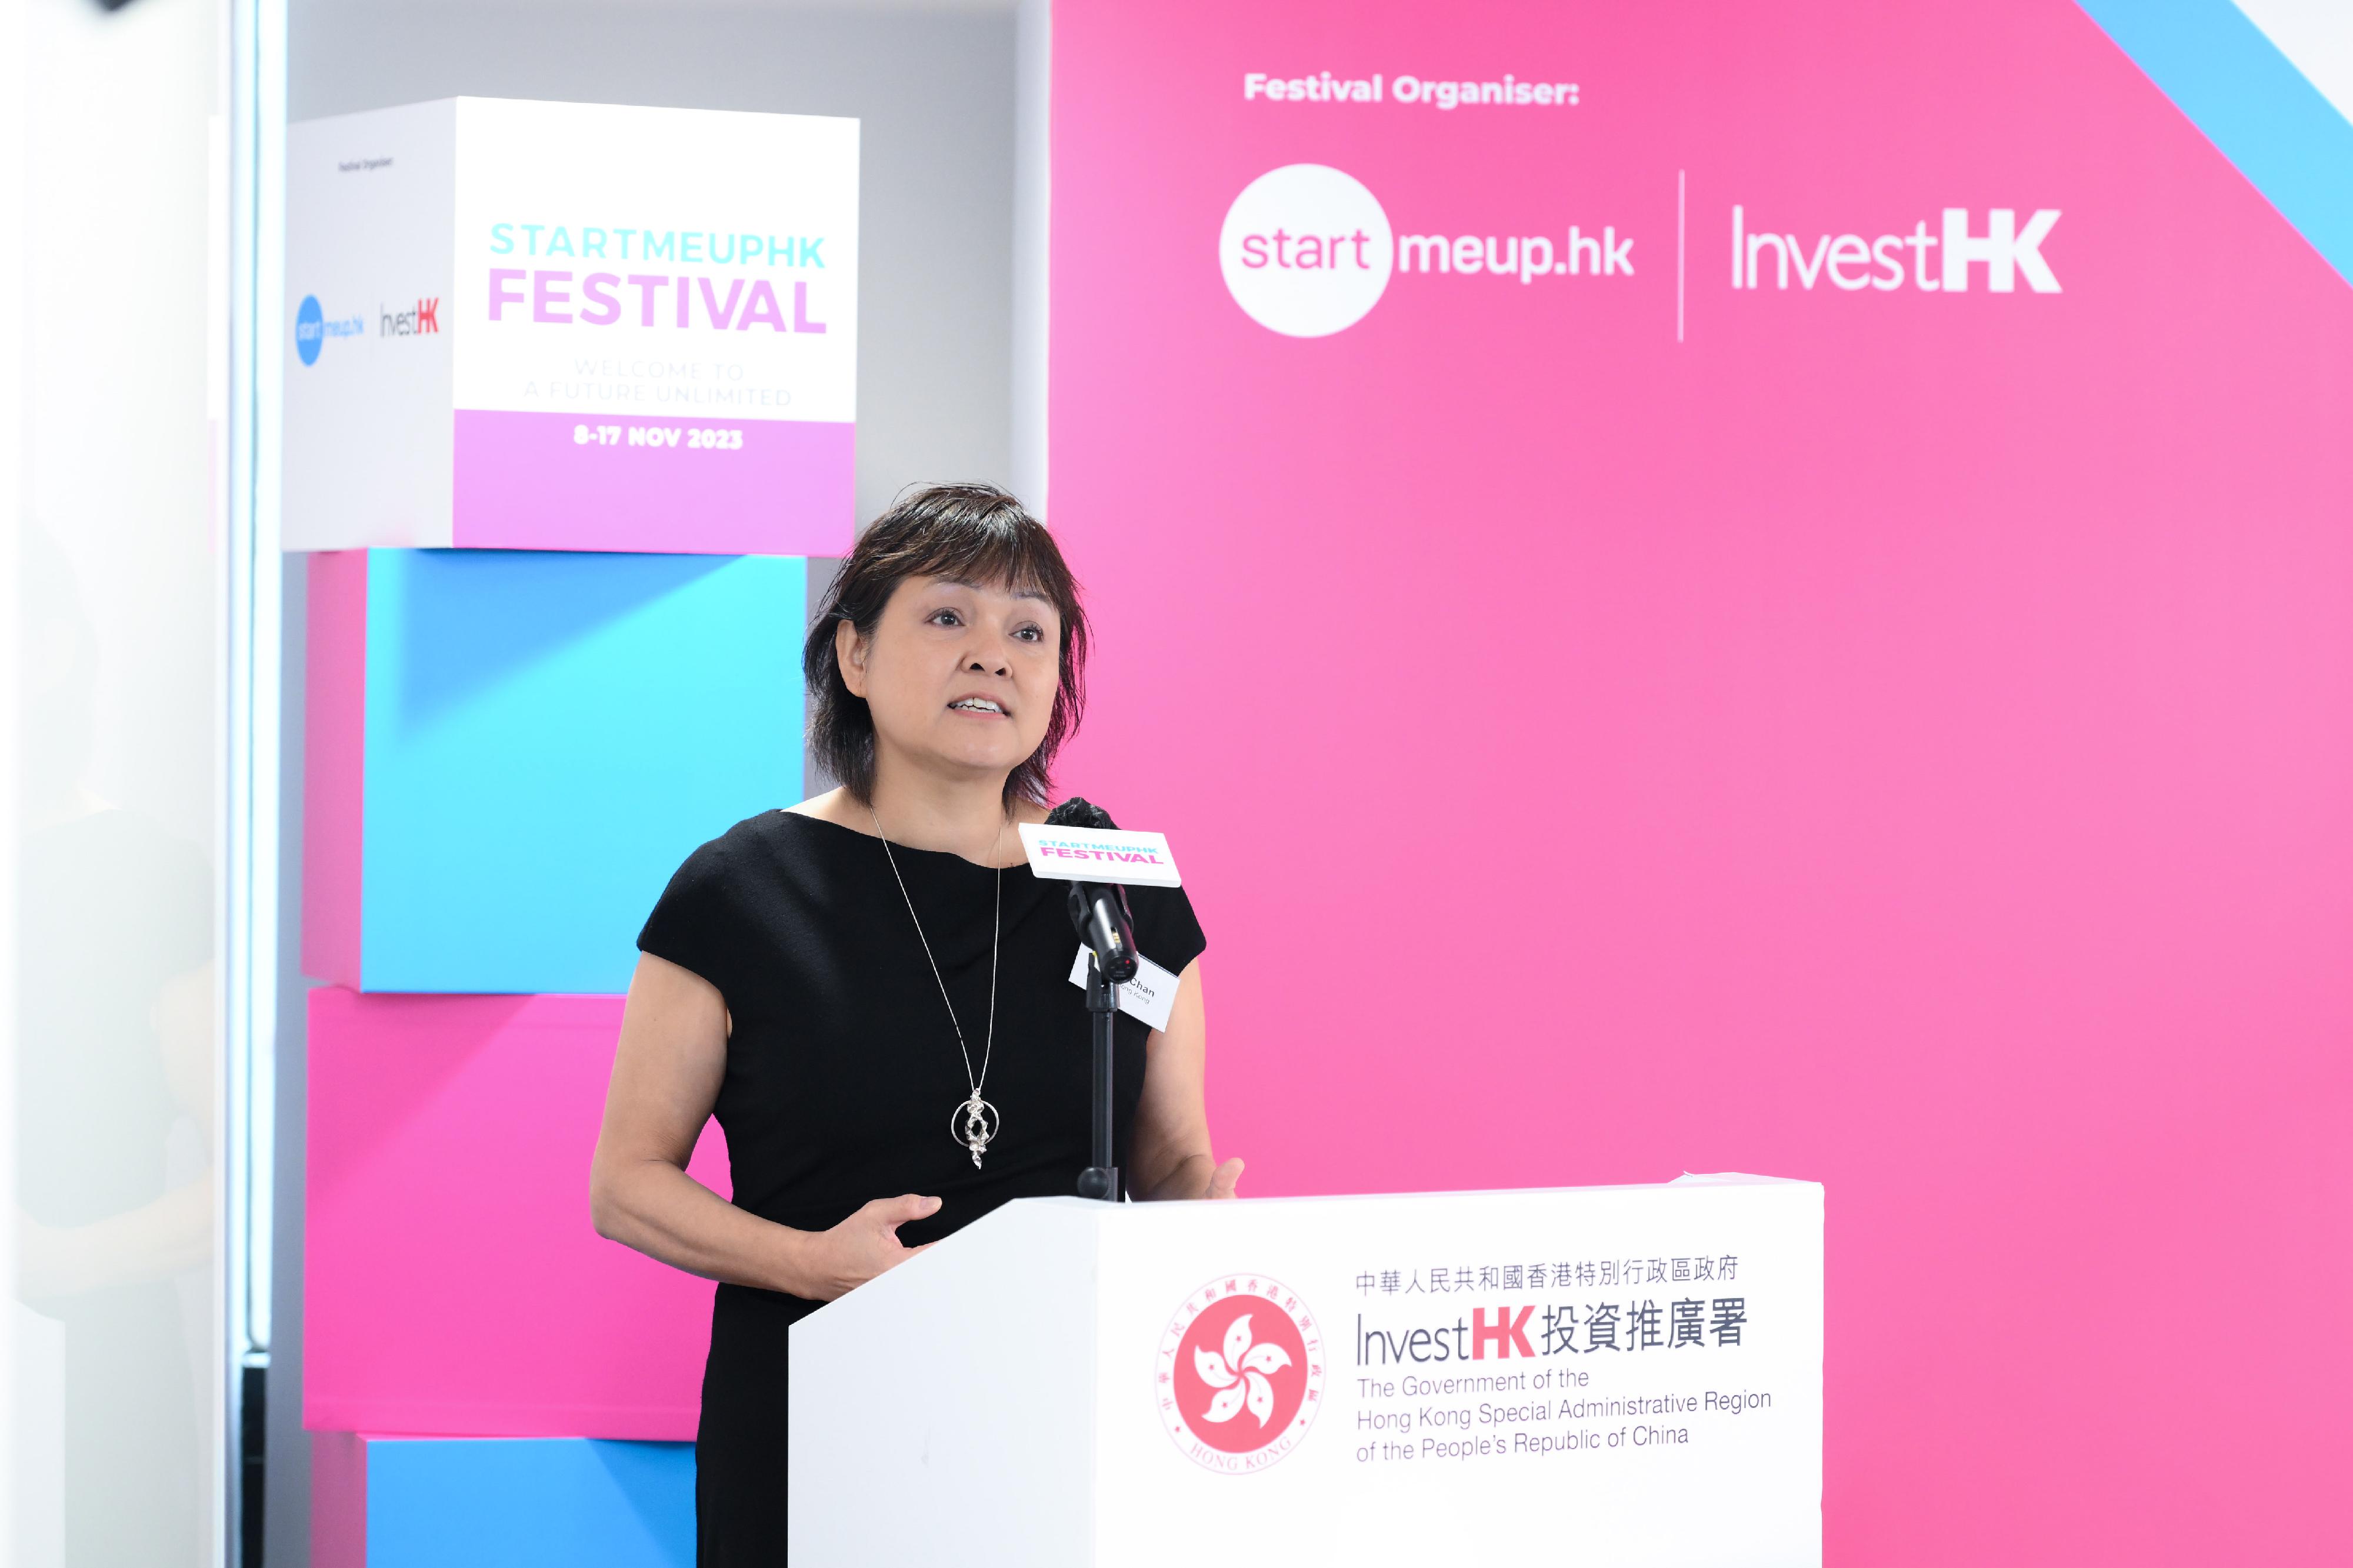 The Head of StartmeupHK at Invest Hong Kong, Ms Jayne Chan, delivers opening remarks at press conference of StartmeupHK Festival 2023.